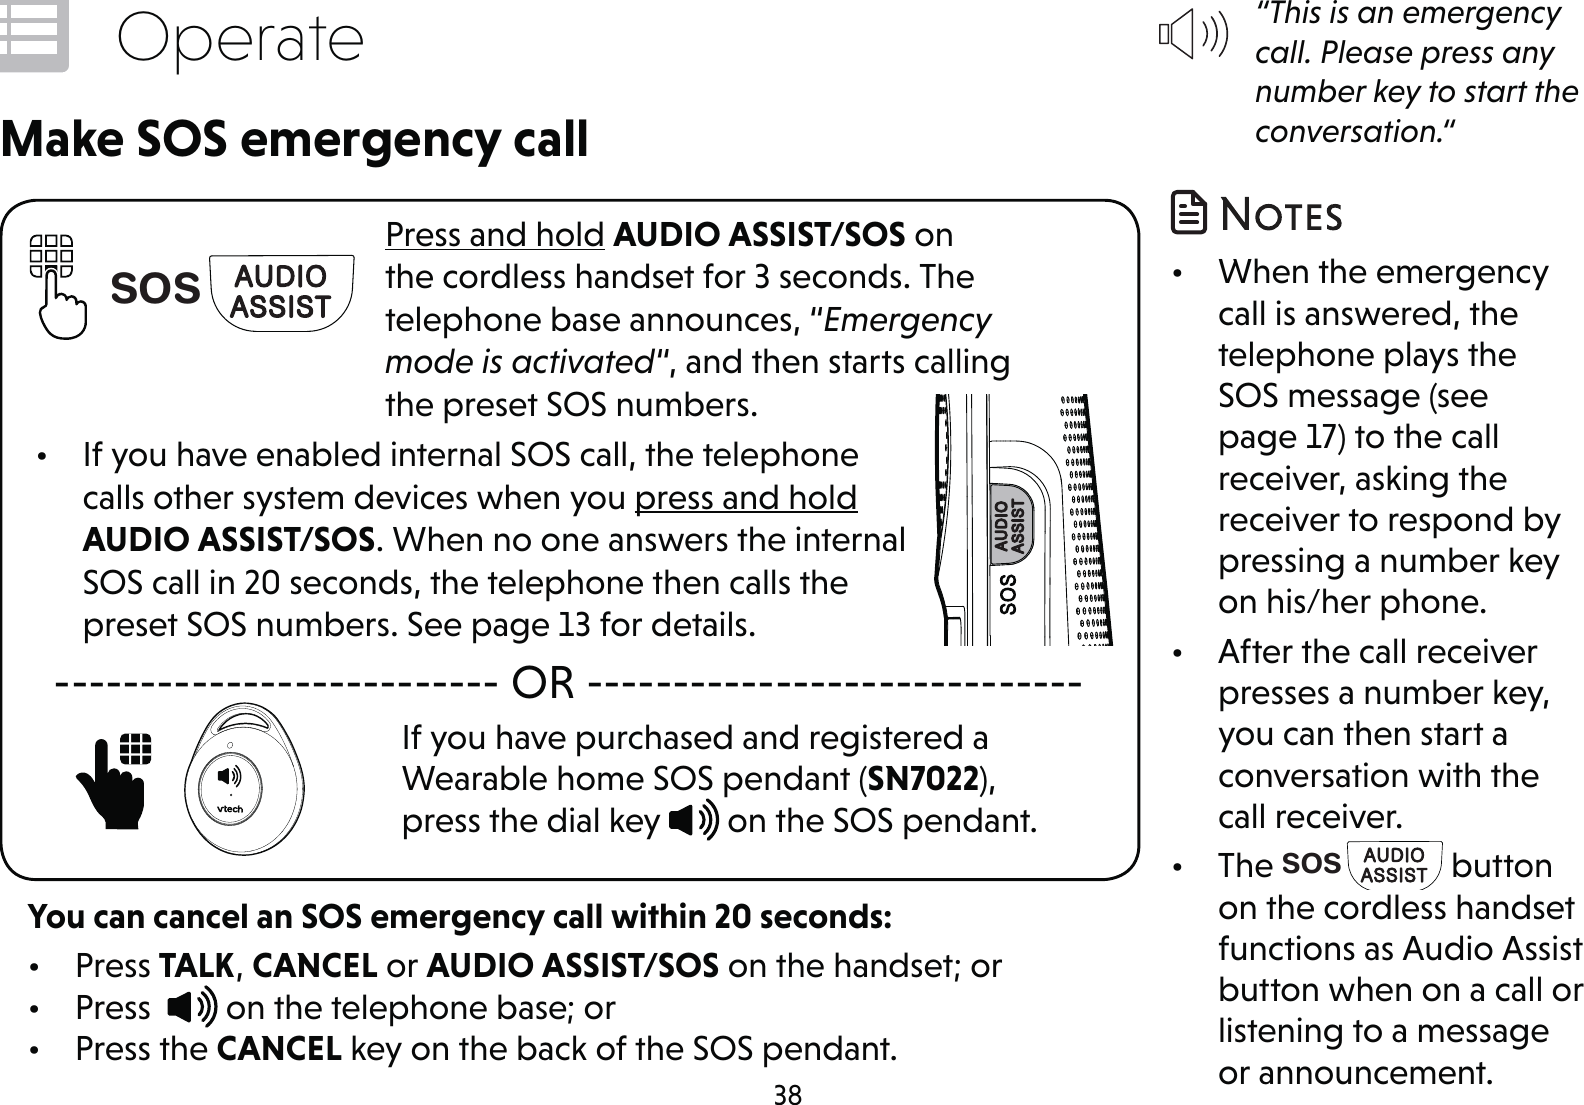 38OperatePress and hold AUDIO ASSIST/SOS on the cordless handset for 3 seconds. The telephone base announces, “Emergency mode is activated“, and then starts calling the preset SOS numbers.•  If you have enabled internal SOS call, the telephone calls other system devices when you press and hold AUDIO ASSIST/SOS. When no one answers the internal SOS call in 20 seconds, the telephone then calls the preset SOS numbers. See page 13 for details.Make SOS emergency call-------------------------- OR -----------------------------If you have purchased and registered a Wearable home SOS pendant (SN7022), press the dial key   on the SOS pendant.     SOSYou can cancel an SOS emergency call within 20 seconds:• Press TALK, CANCEL or AUDIO ASSIST/SOS on the handset; or• Press    on the telephone base; or• Press the CANCEL key on the back of the SOS pendant.“This is an emergency call. Please press any number key to start the conversation.“•  When the emergency call is answered, the telephone plays the SOS message (see page 17) to the call receiver, asking the receiver to respond by pressing a number key on his/her phone.•  After the call receiver presses a number key, you can then start a conversation with the call receiver.• The SOS  button on the cordless handset functions as Audio Assist button when on a call or listening to a message or announcement.